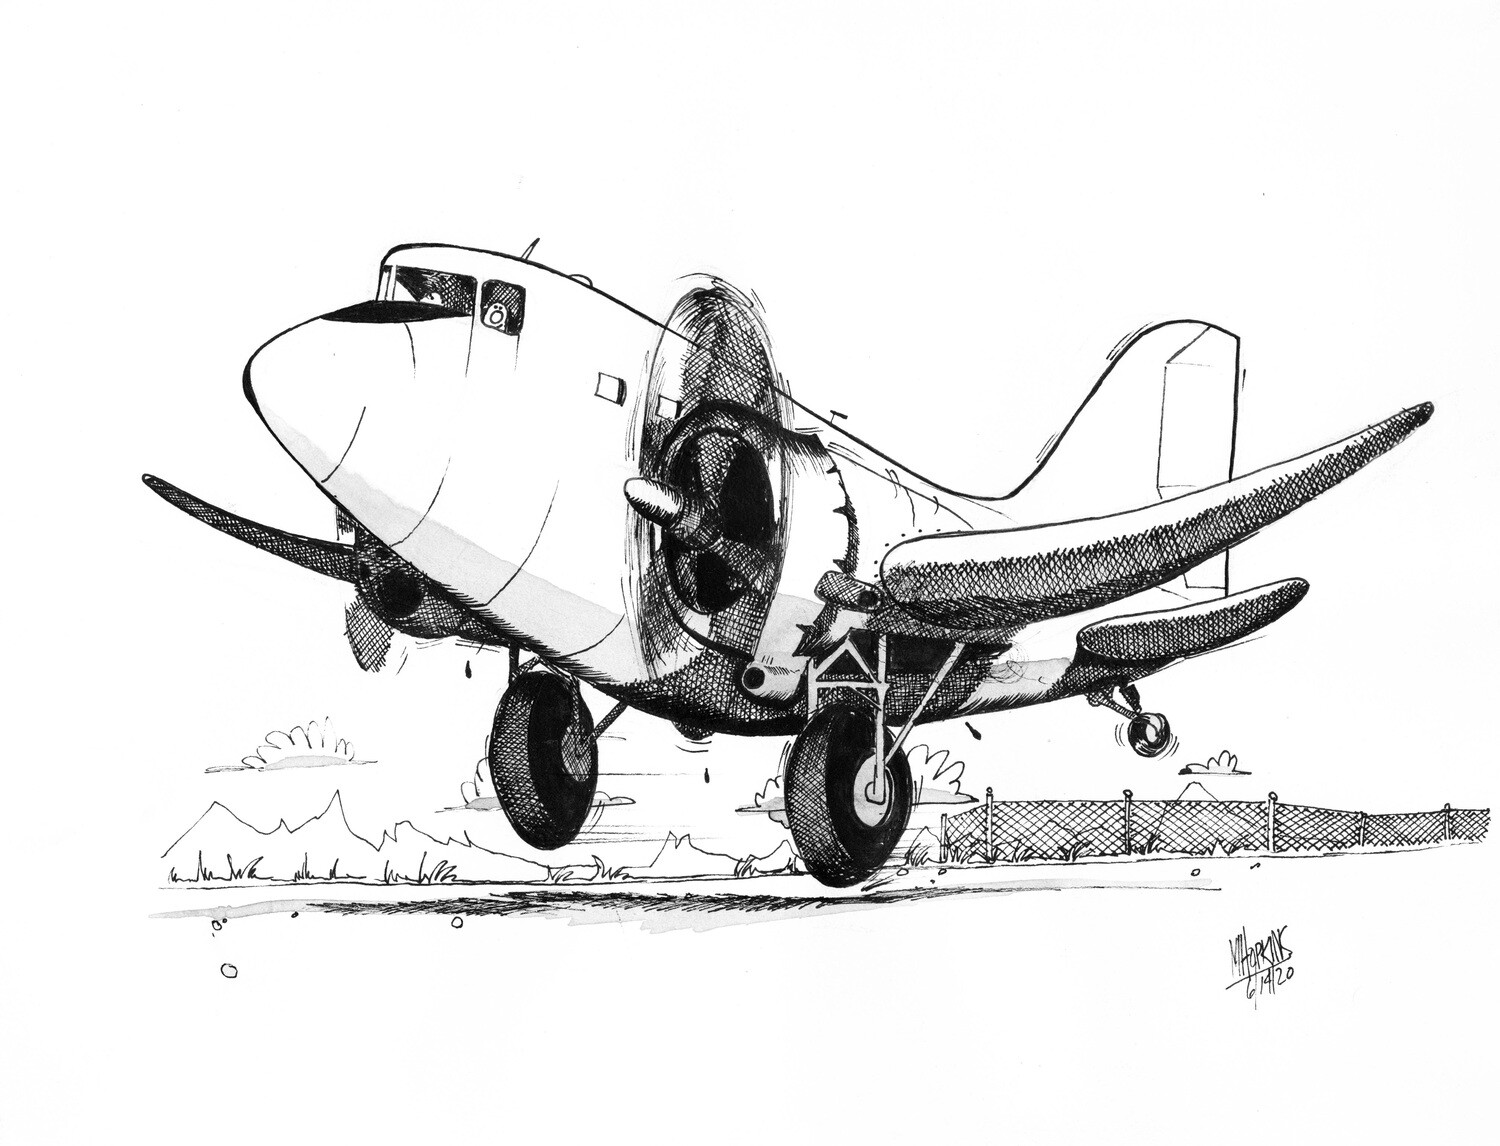 Douglas DC-3 - Limited Edition Giclée Prints from $50 to $100